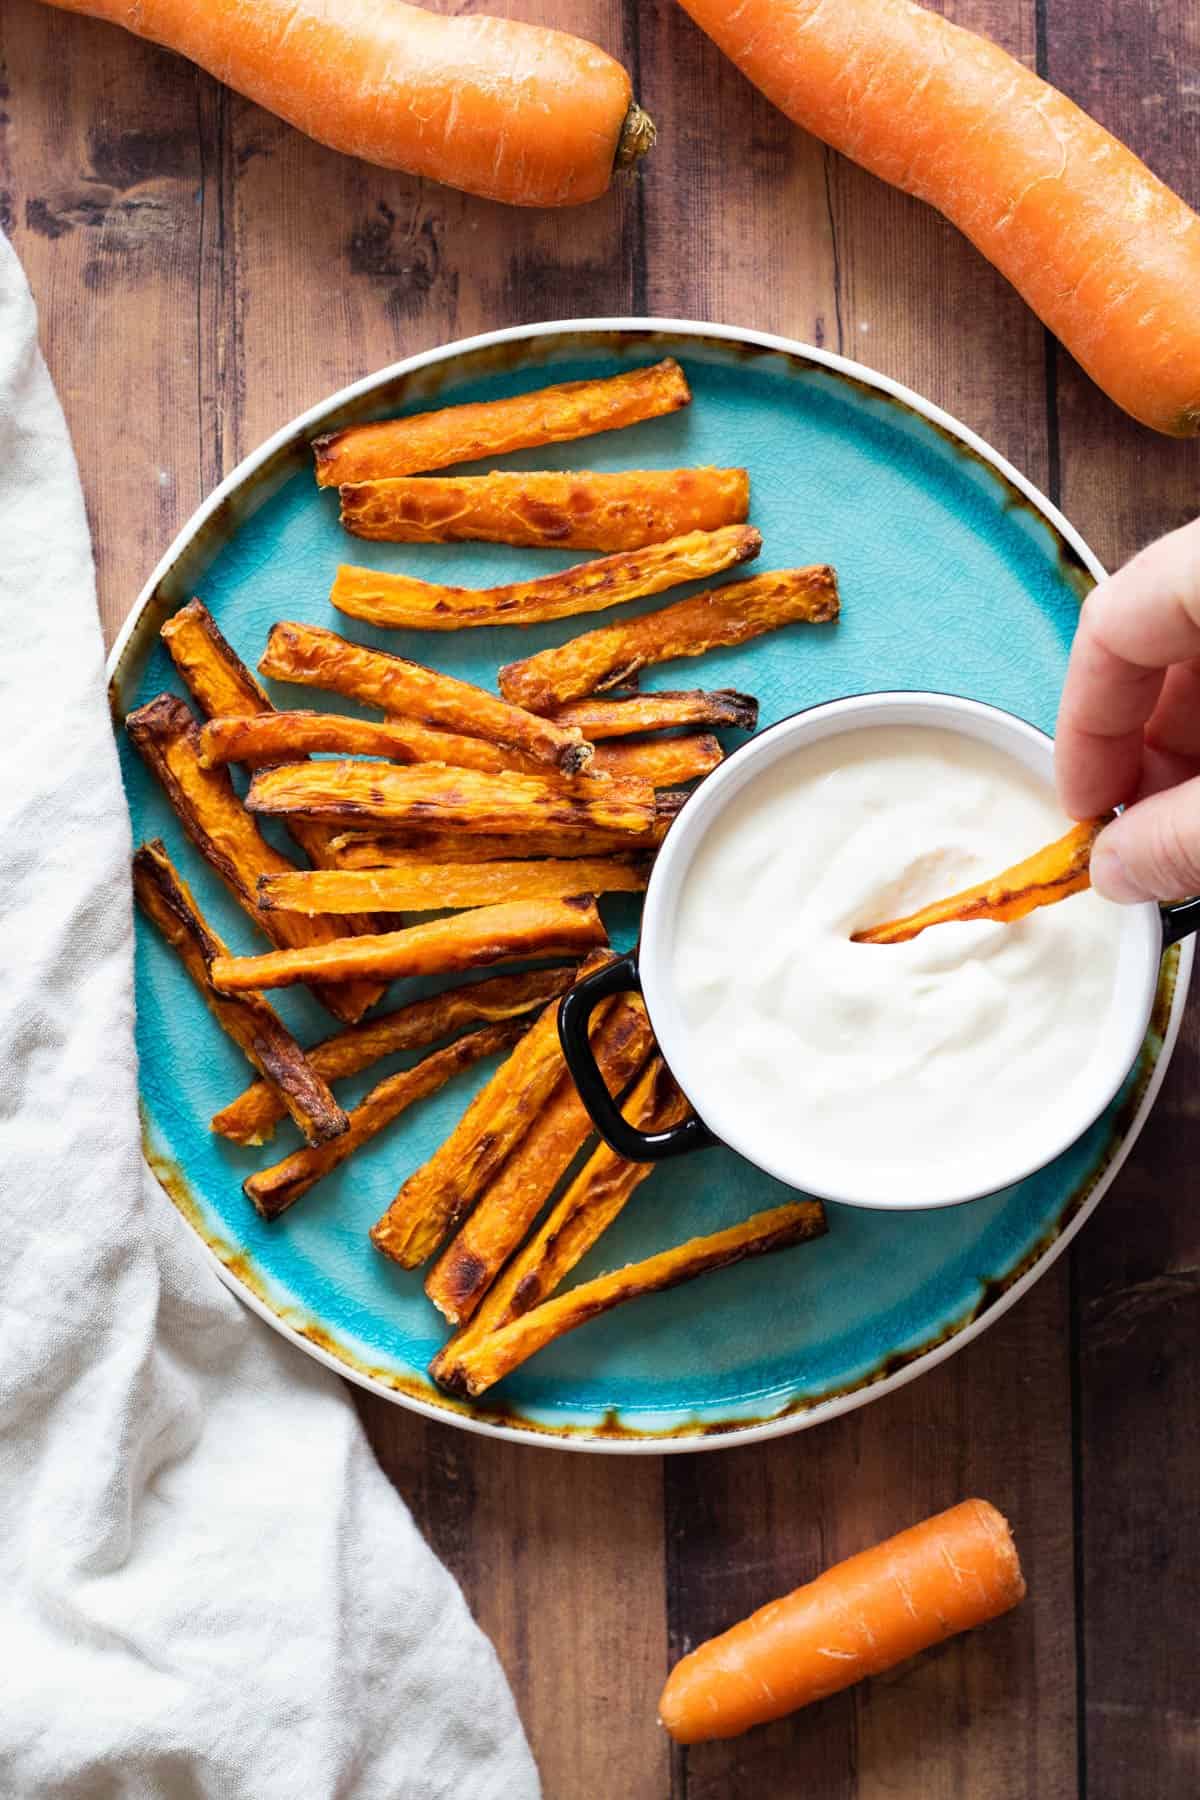 Carrot fries on a blue plate with a dipping sauce.